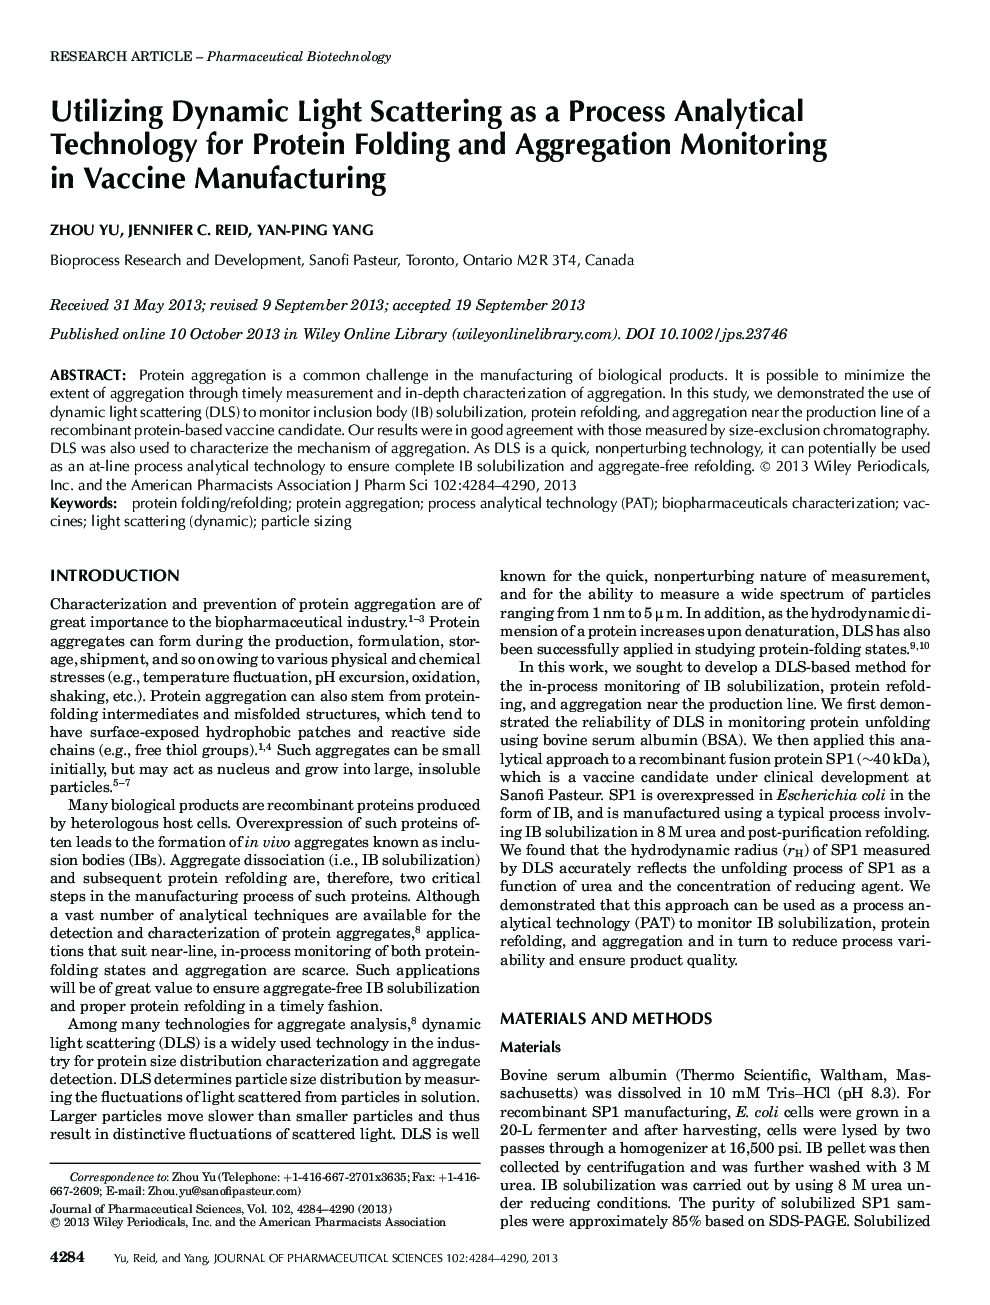 Utilizing Dynamic Light Scattering as a Process Analytical Technology for Protein Folding and Aggregation Monitoring in Vaccine Manufacturing